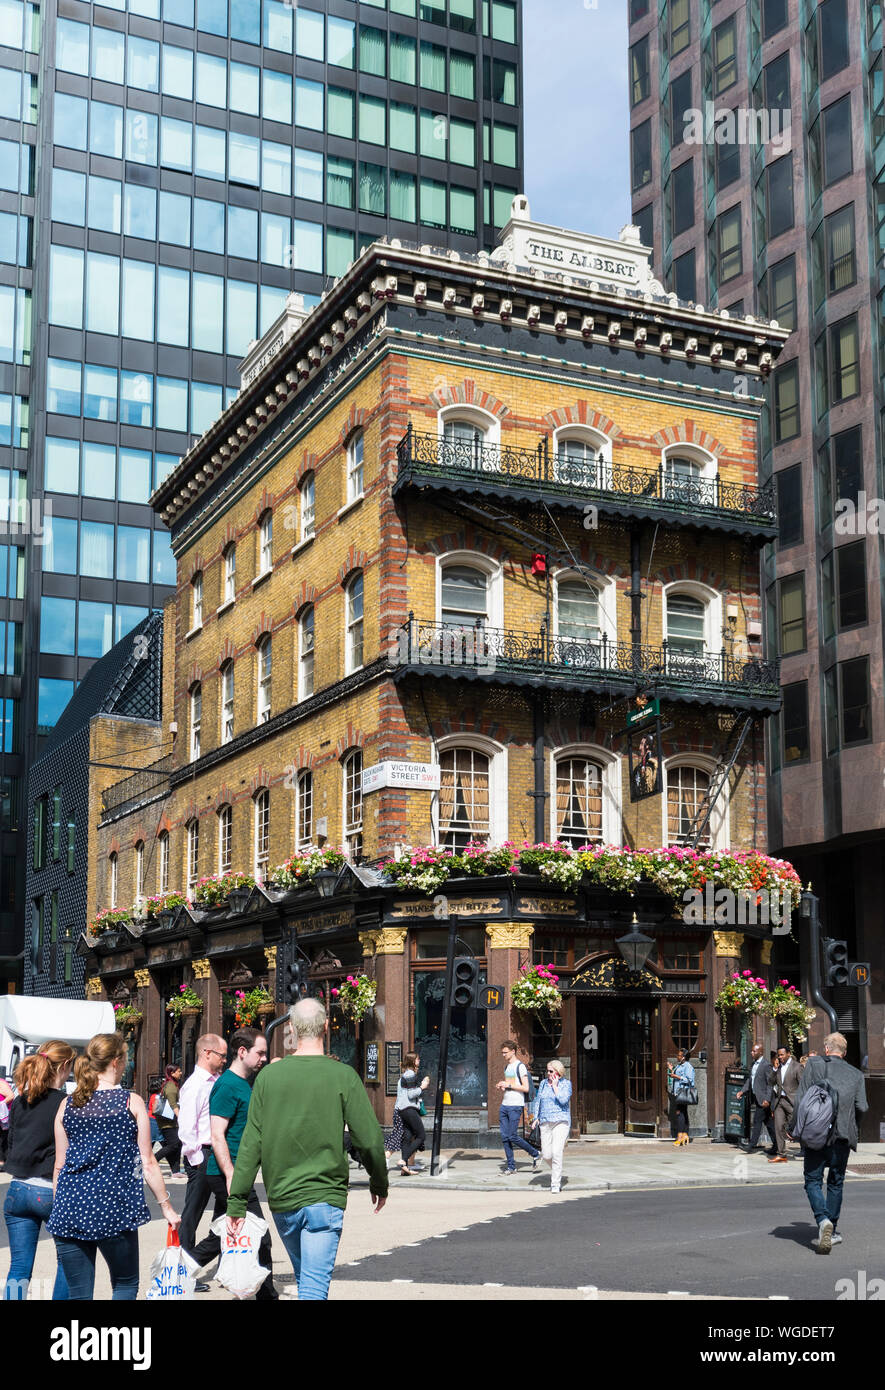 The Albert pub (public house) in Victoria Street, City of Westminster, Central London, England, UK. London pubs. Stock Photo